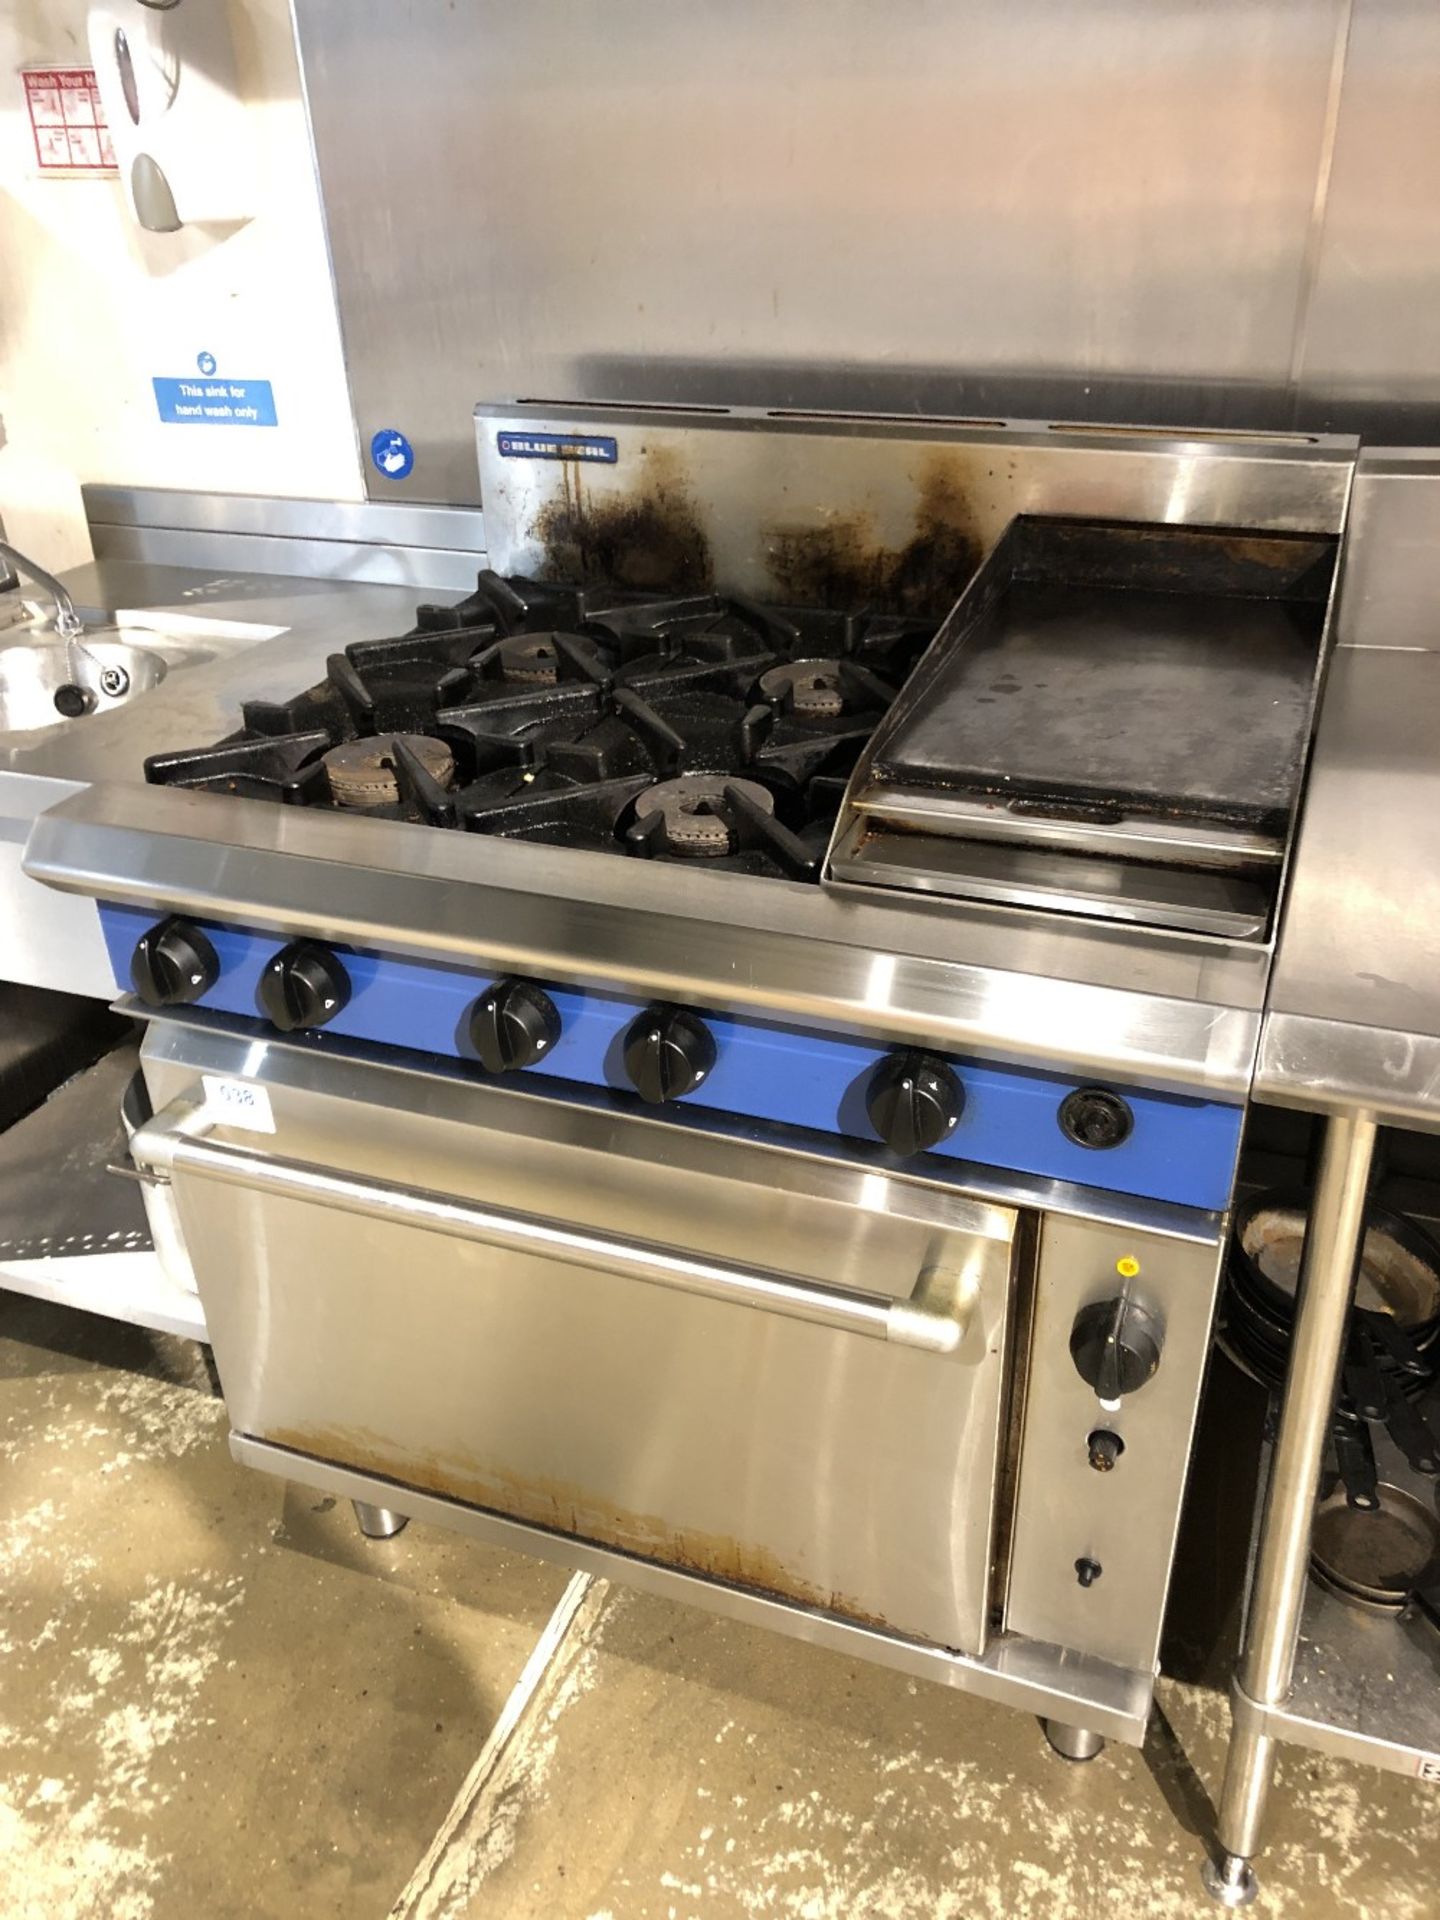 Blue Seal G56CF Stainless Steel Four Burner Range Oven With 300mm Smooth Griddle - Image 3 of 4